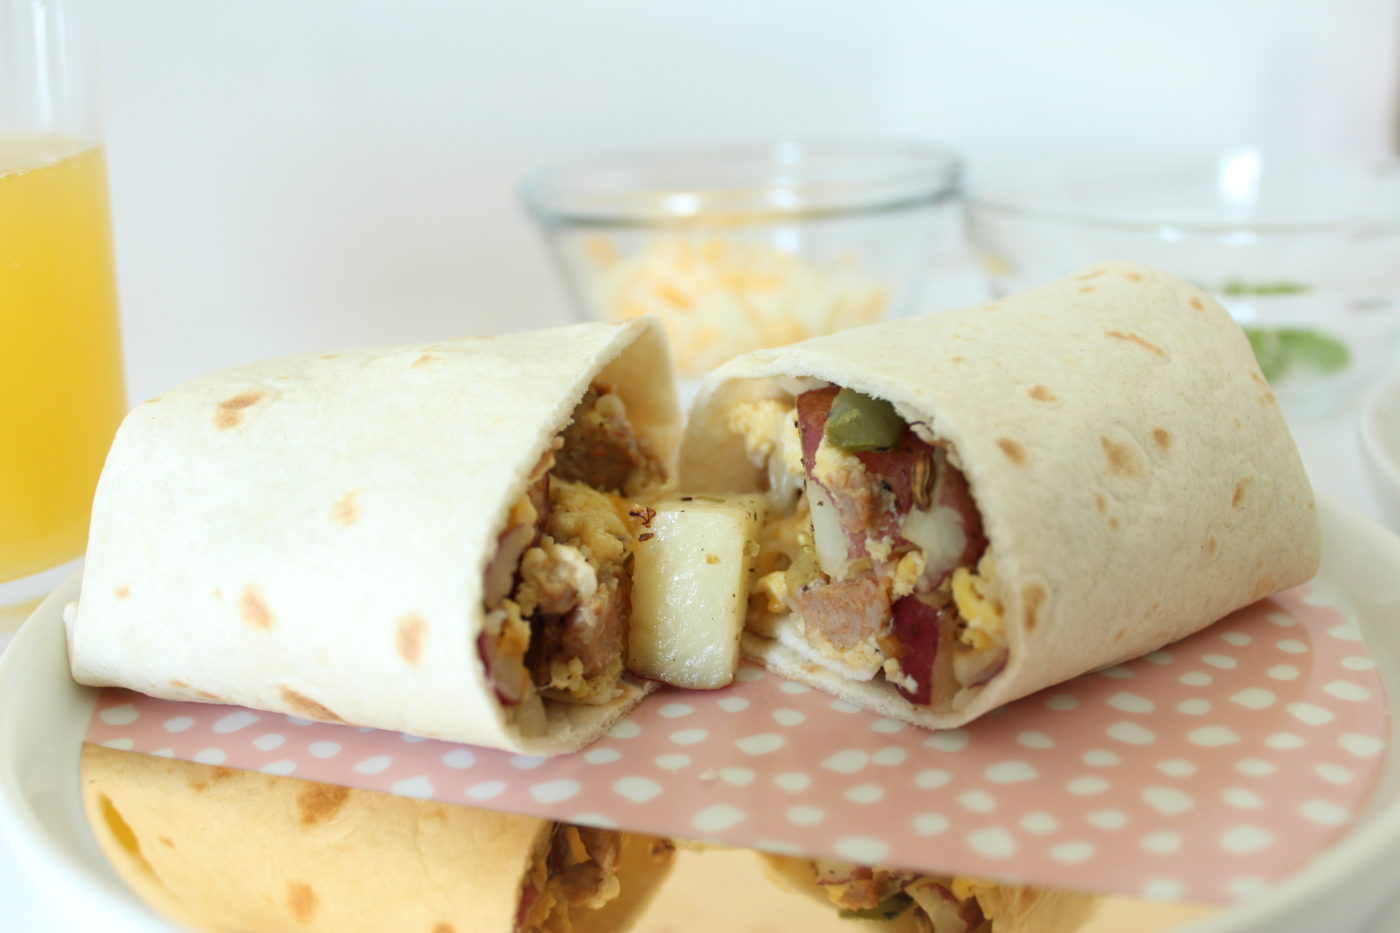 The roasted potatoes add a bit of 'weight' to the burrito. The potatoes are my favorite.